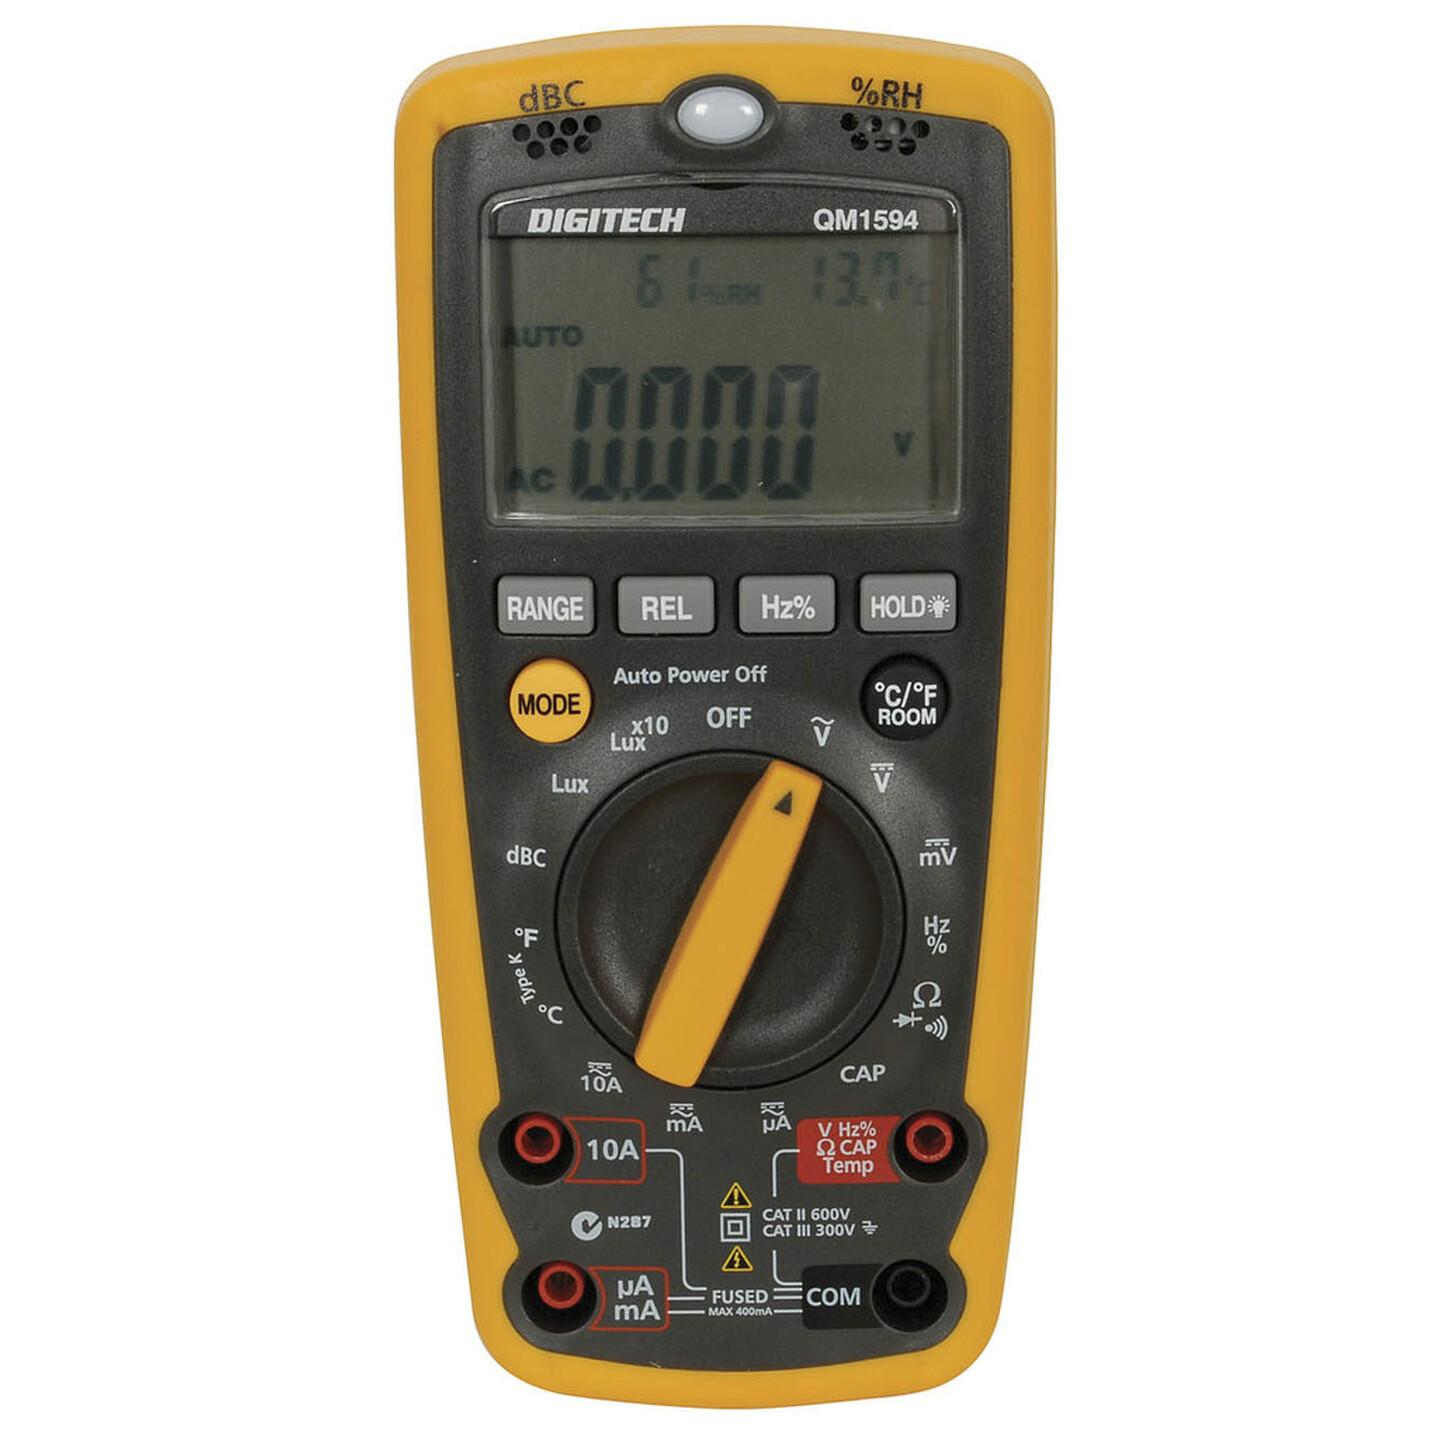 Multifunction Environment Meter with DMM